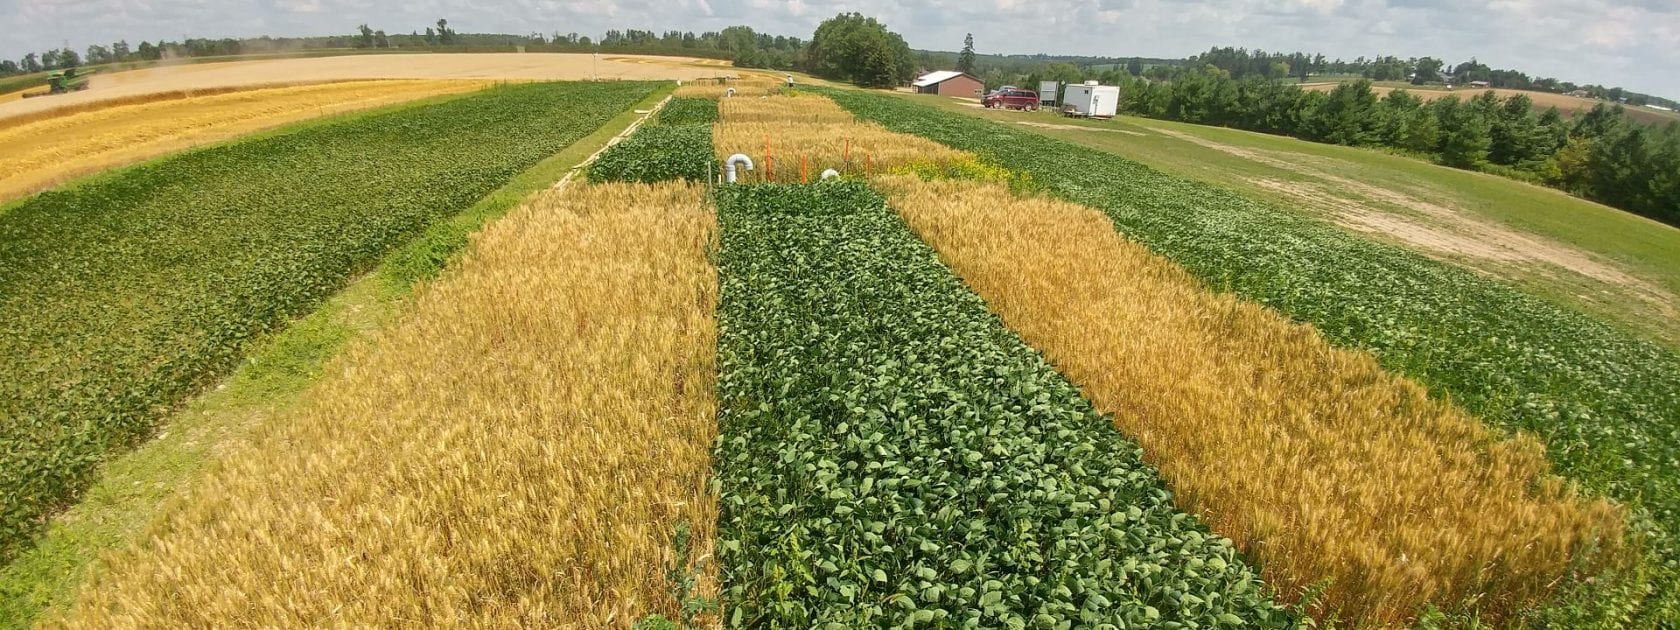 Lysimeter Site in Wheat and Soybean